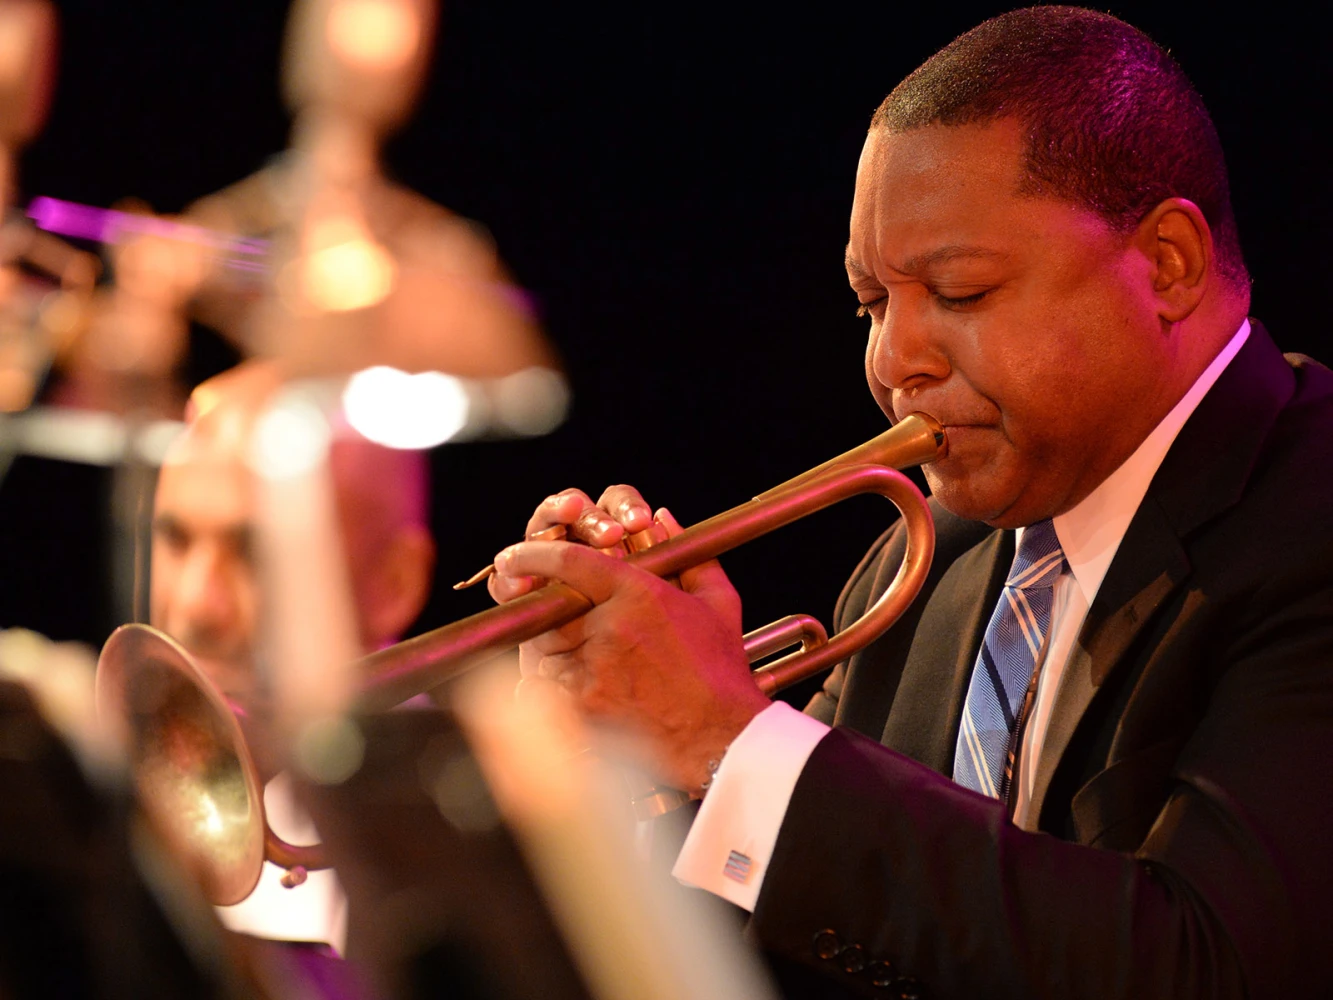 The Jazz at Lincoln Center Orchestra with Wynton Marsalis: What to expect - 2